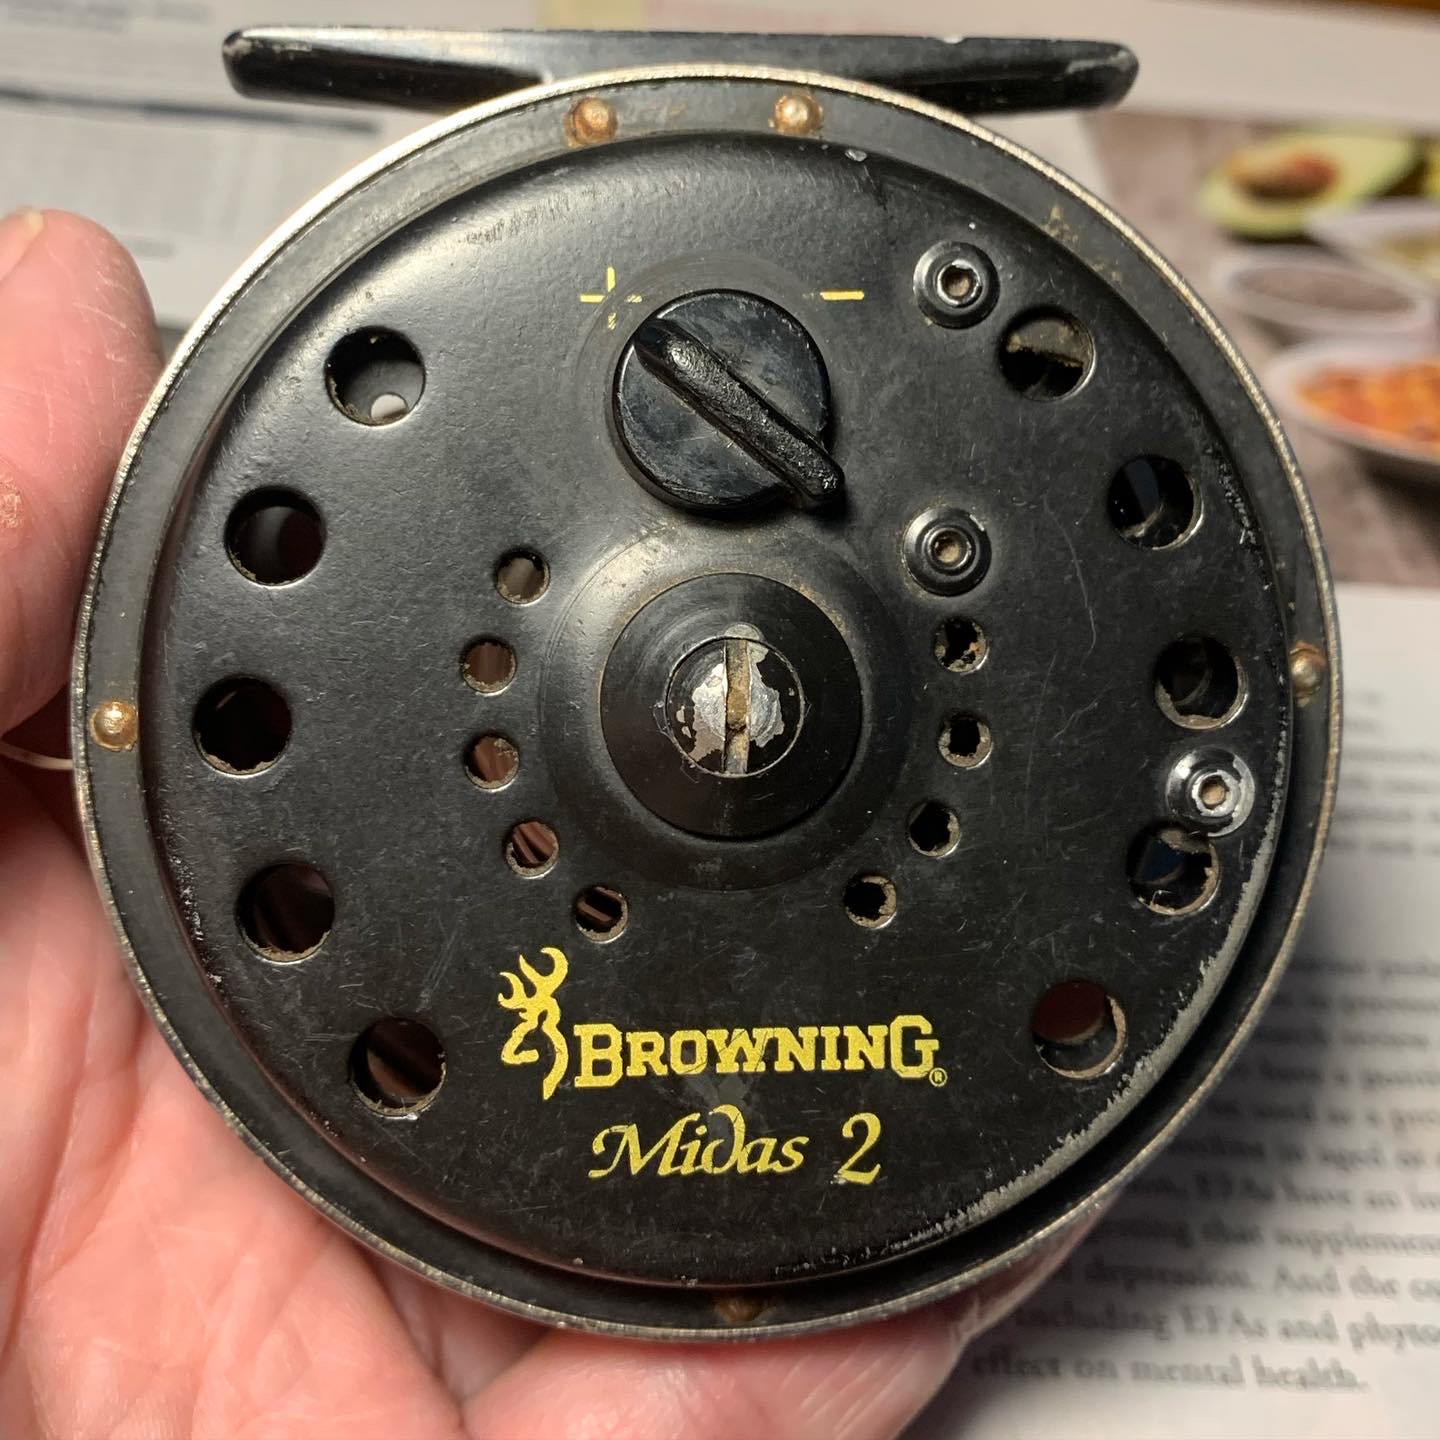 Browning Midas 2 “Martin”, Classic Fly Reels